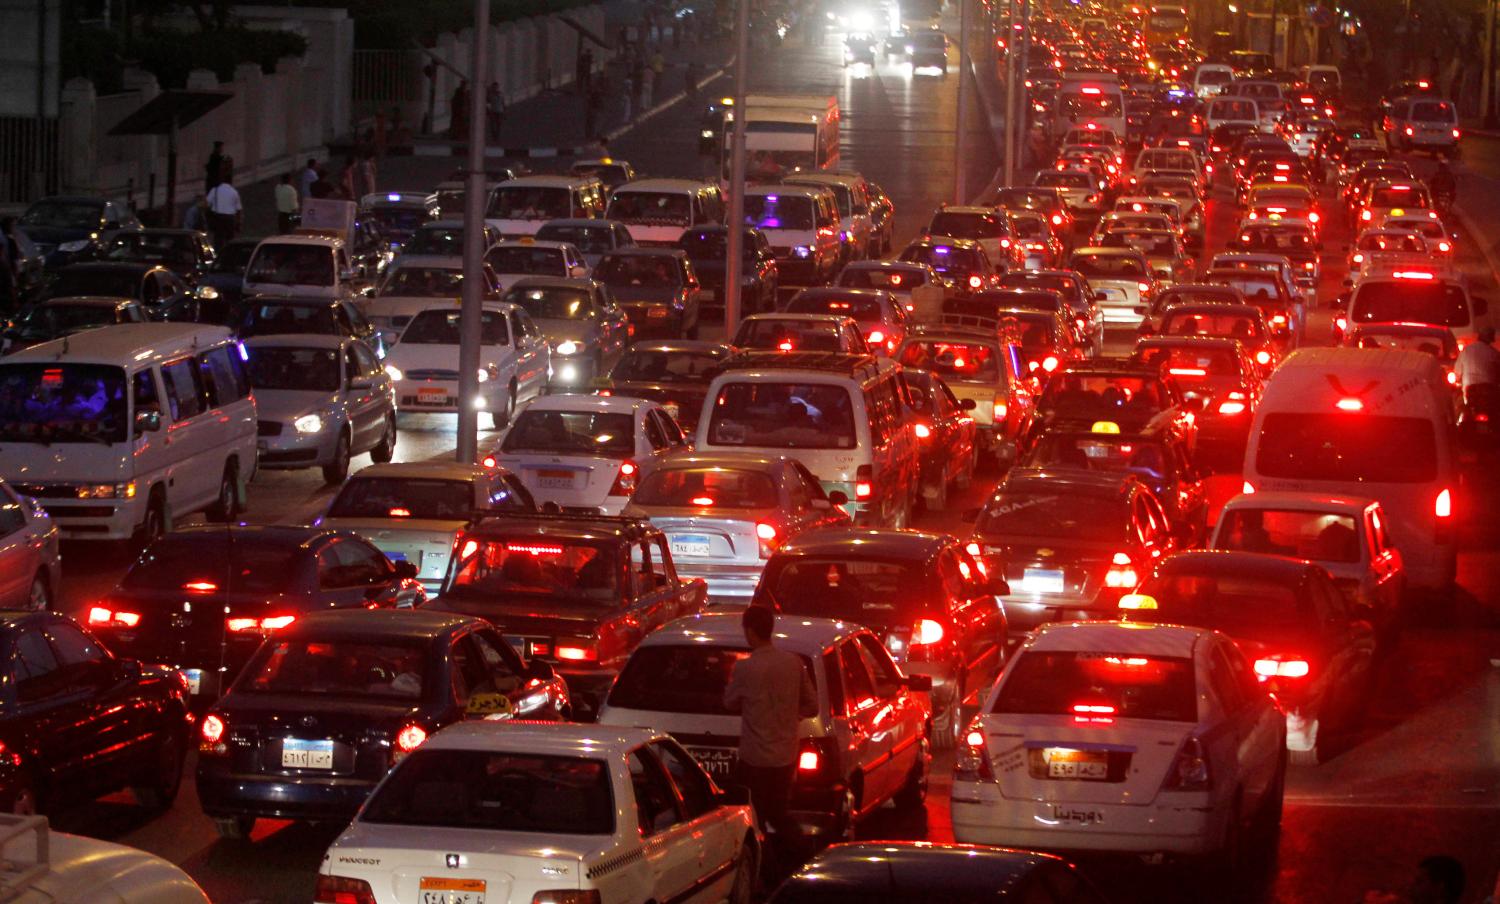 A general view of the traffic on a crowded road in Cairo October 26, 2010. Smog-ridden Cairo's gridlock shows investment in roads, railways and ports is failing to keep pace with economic growth, menacing public health and threatening economic asphyxiation. Around 12,000 deaths occur every year in Egypt because of road accidents, the highest rate in the world per head of population bar Eritrea and the Cook Islands, according to the World Health Organization's most recent report in 2009. The capital's congested roads come to a standstill daily as infrastructure fails to support population growth of 2 percent a year and as thousands of new cars hit the streets every year. Picture taken October 26, 2010. To match Feature EGYPT-BUSINESS/       REUTERS/Mohamed Abd El-Ghany (EGYPT - Tags: BUSINESS SOCIETY TRANSPORT) - GM1E71R08F001